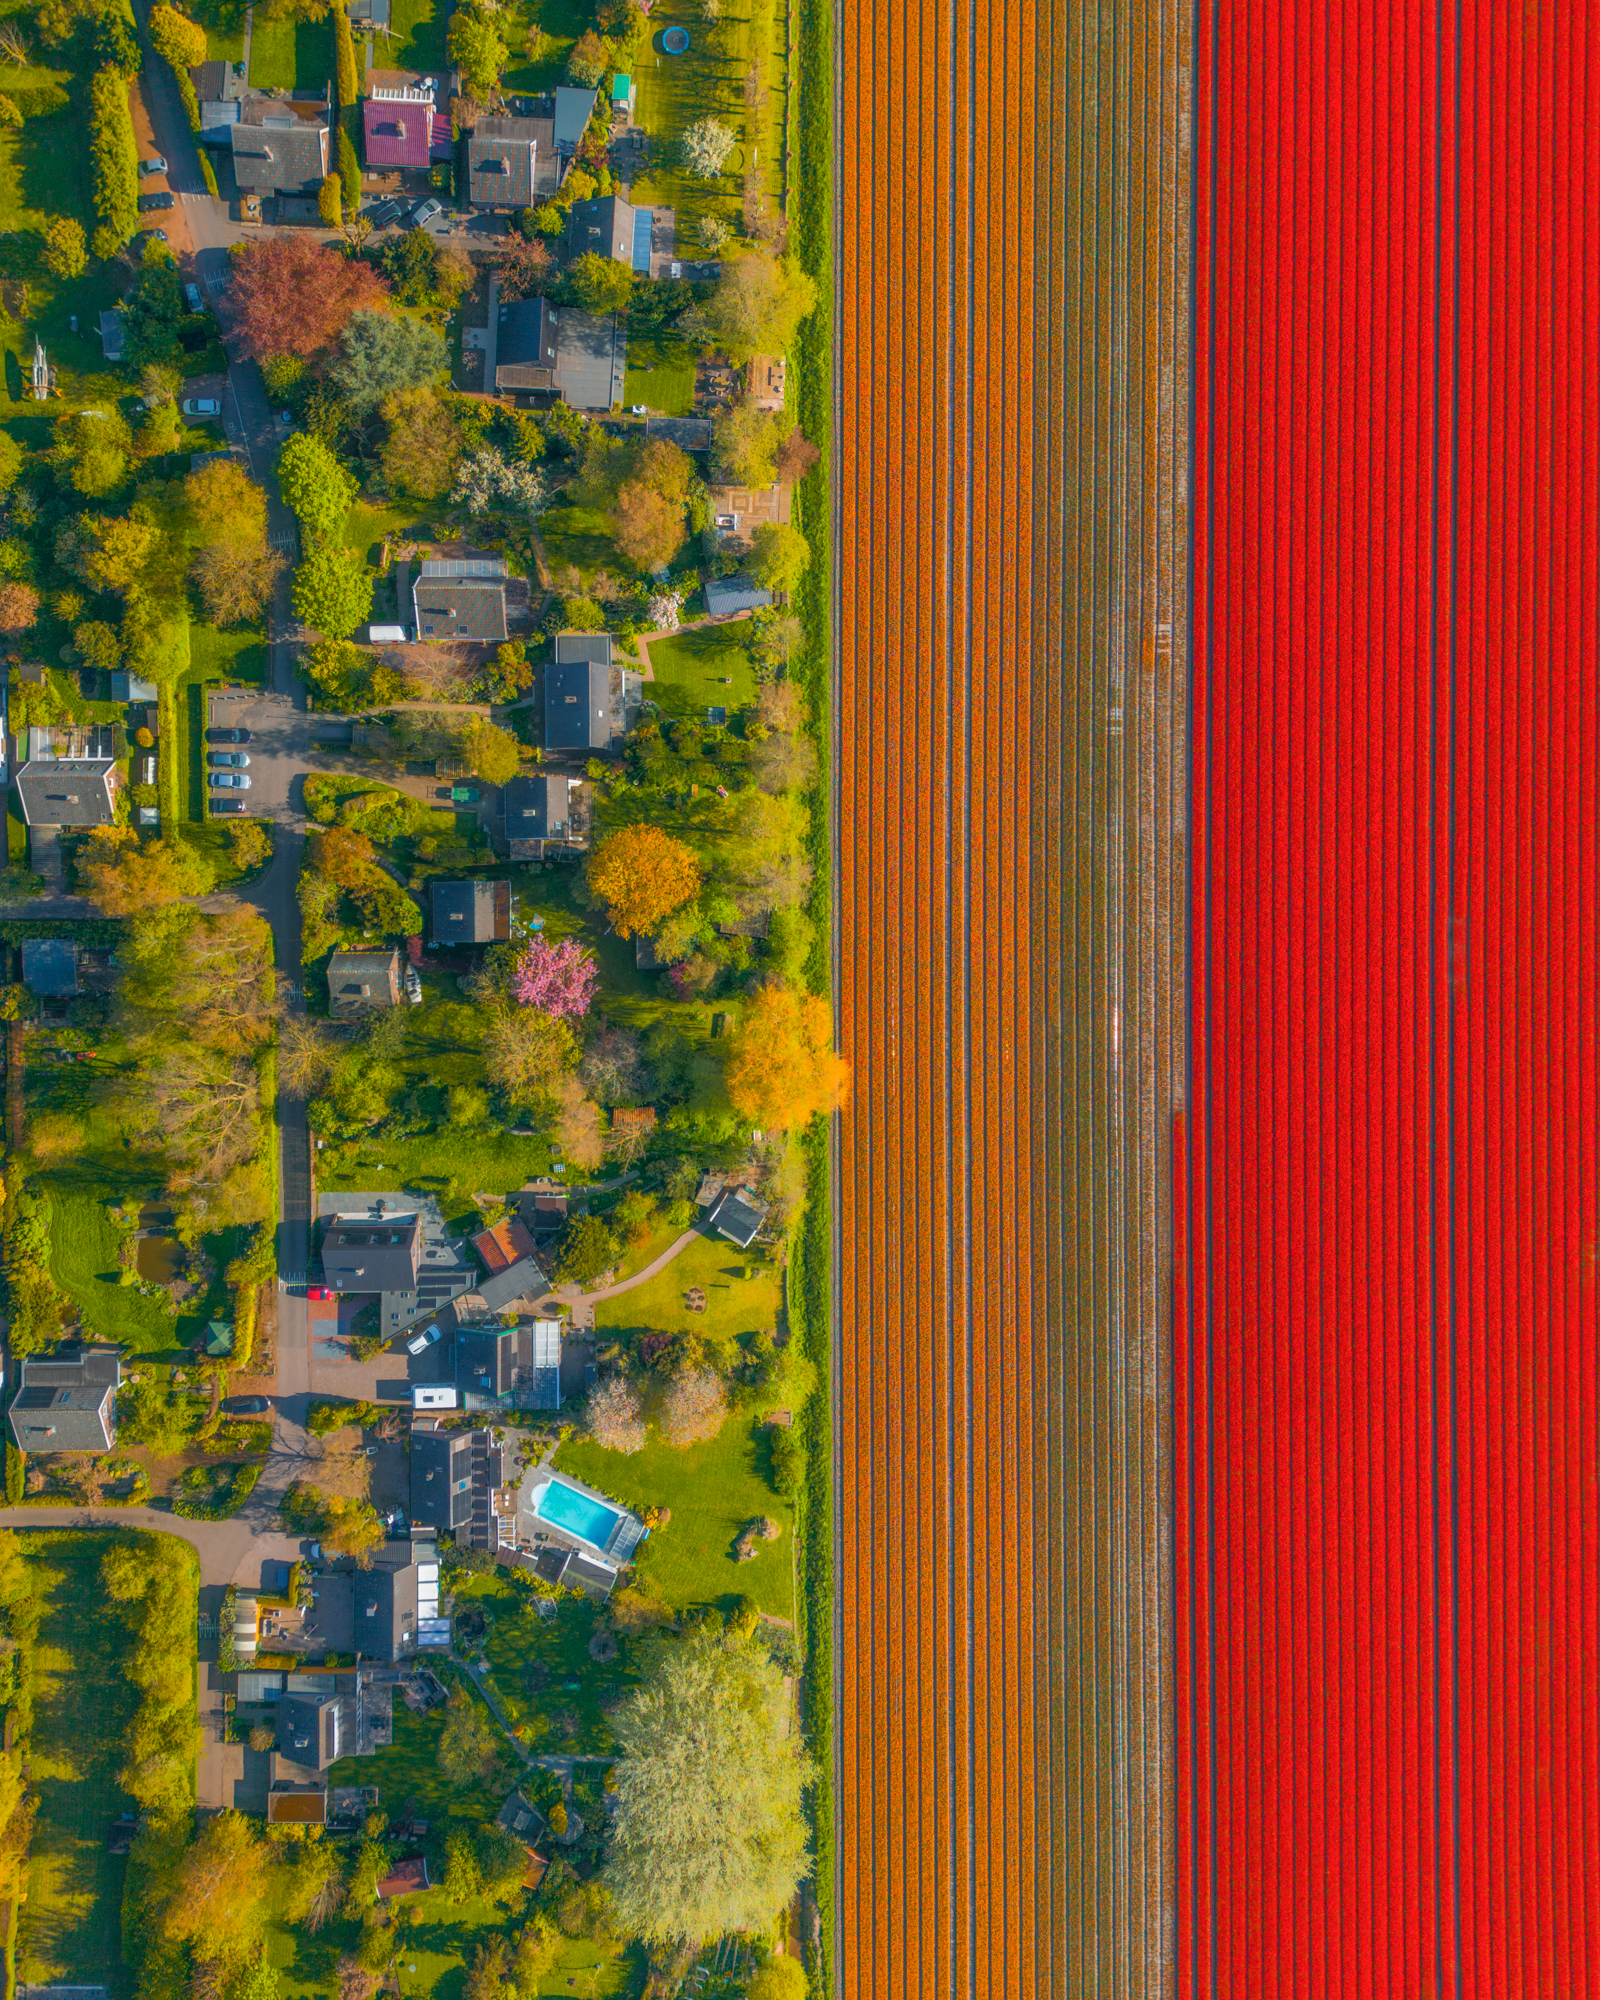 The split! Imagine looking over a sea of red tulips from your house!